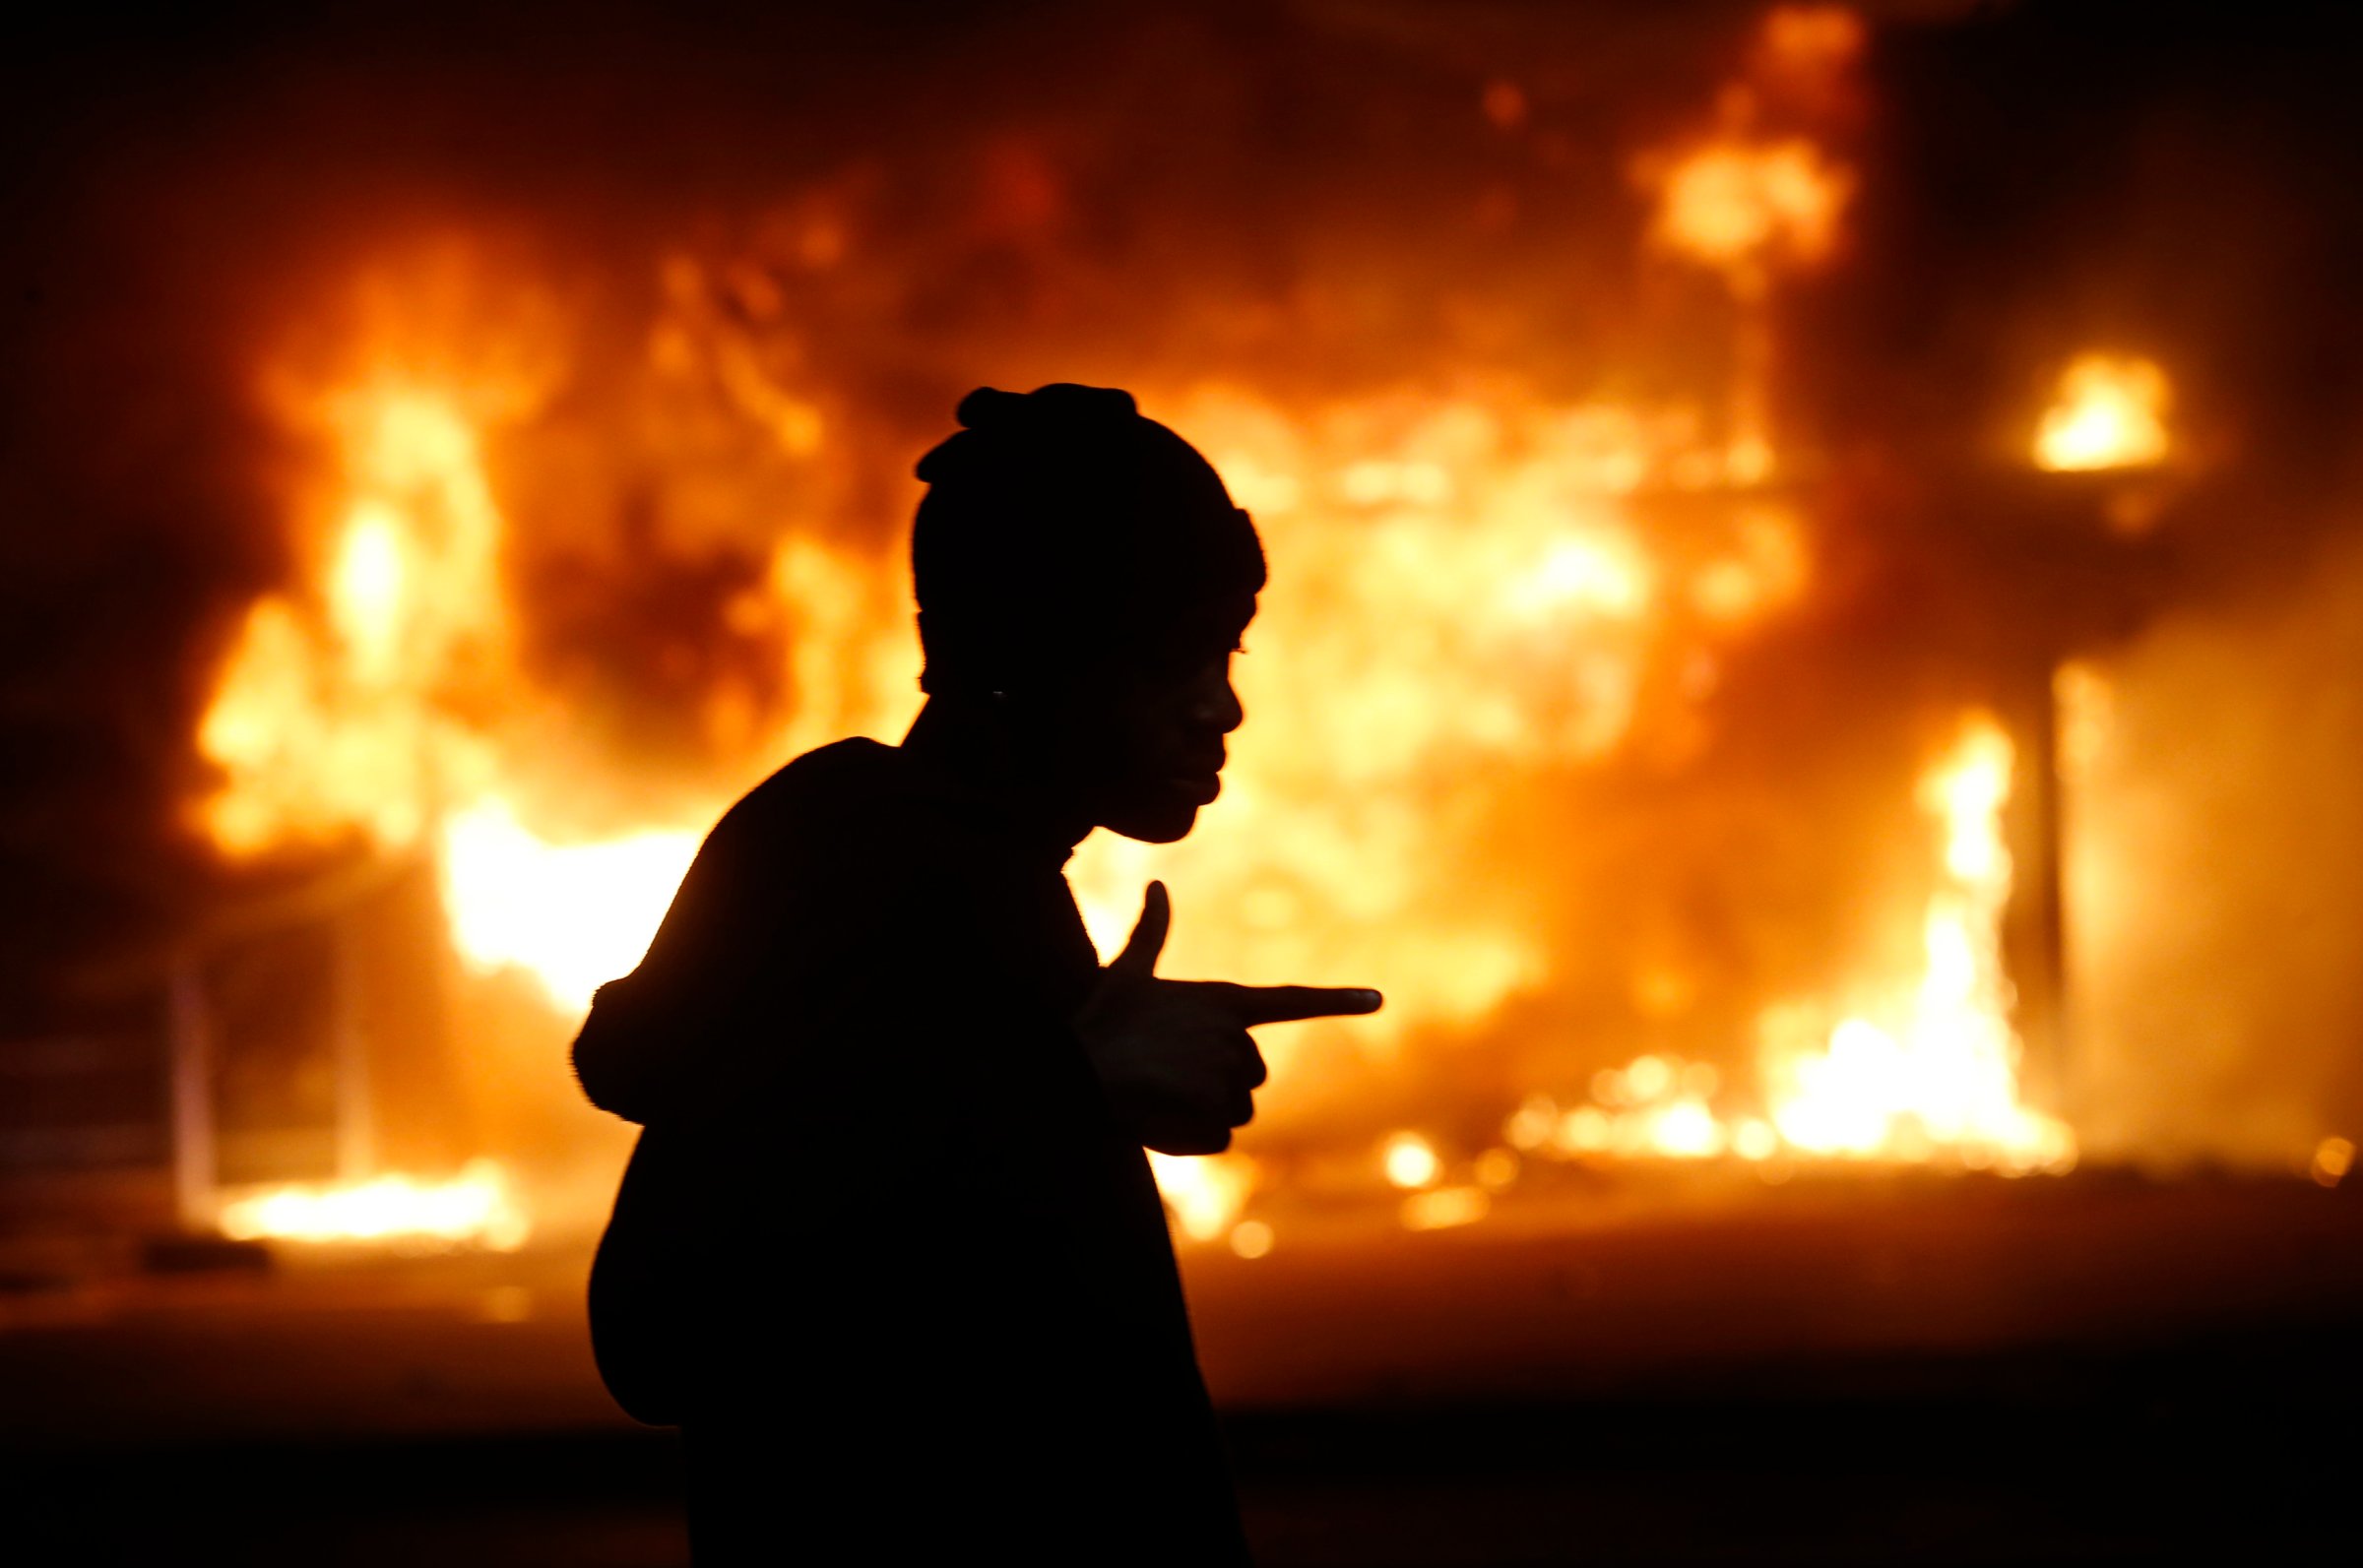 A man walks past a burning building during rioting after a grand jury returned no indictment in the shooting of Michael Brown in Ferguson, Missouri